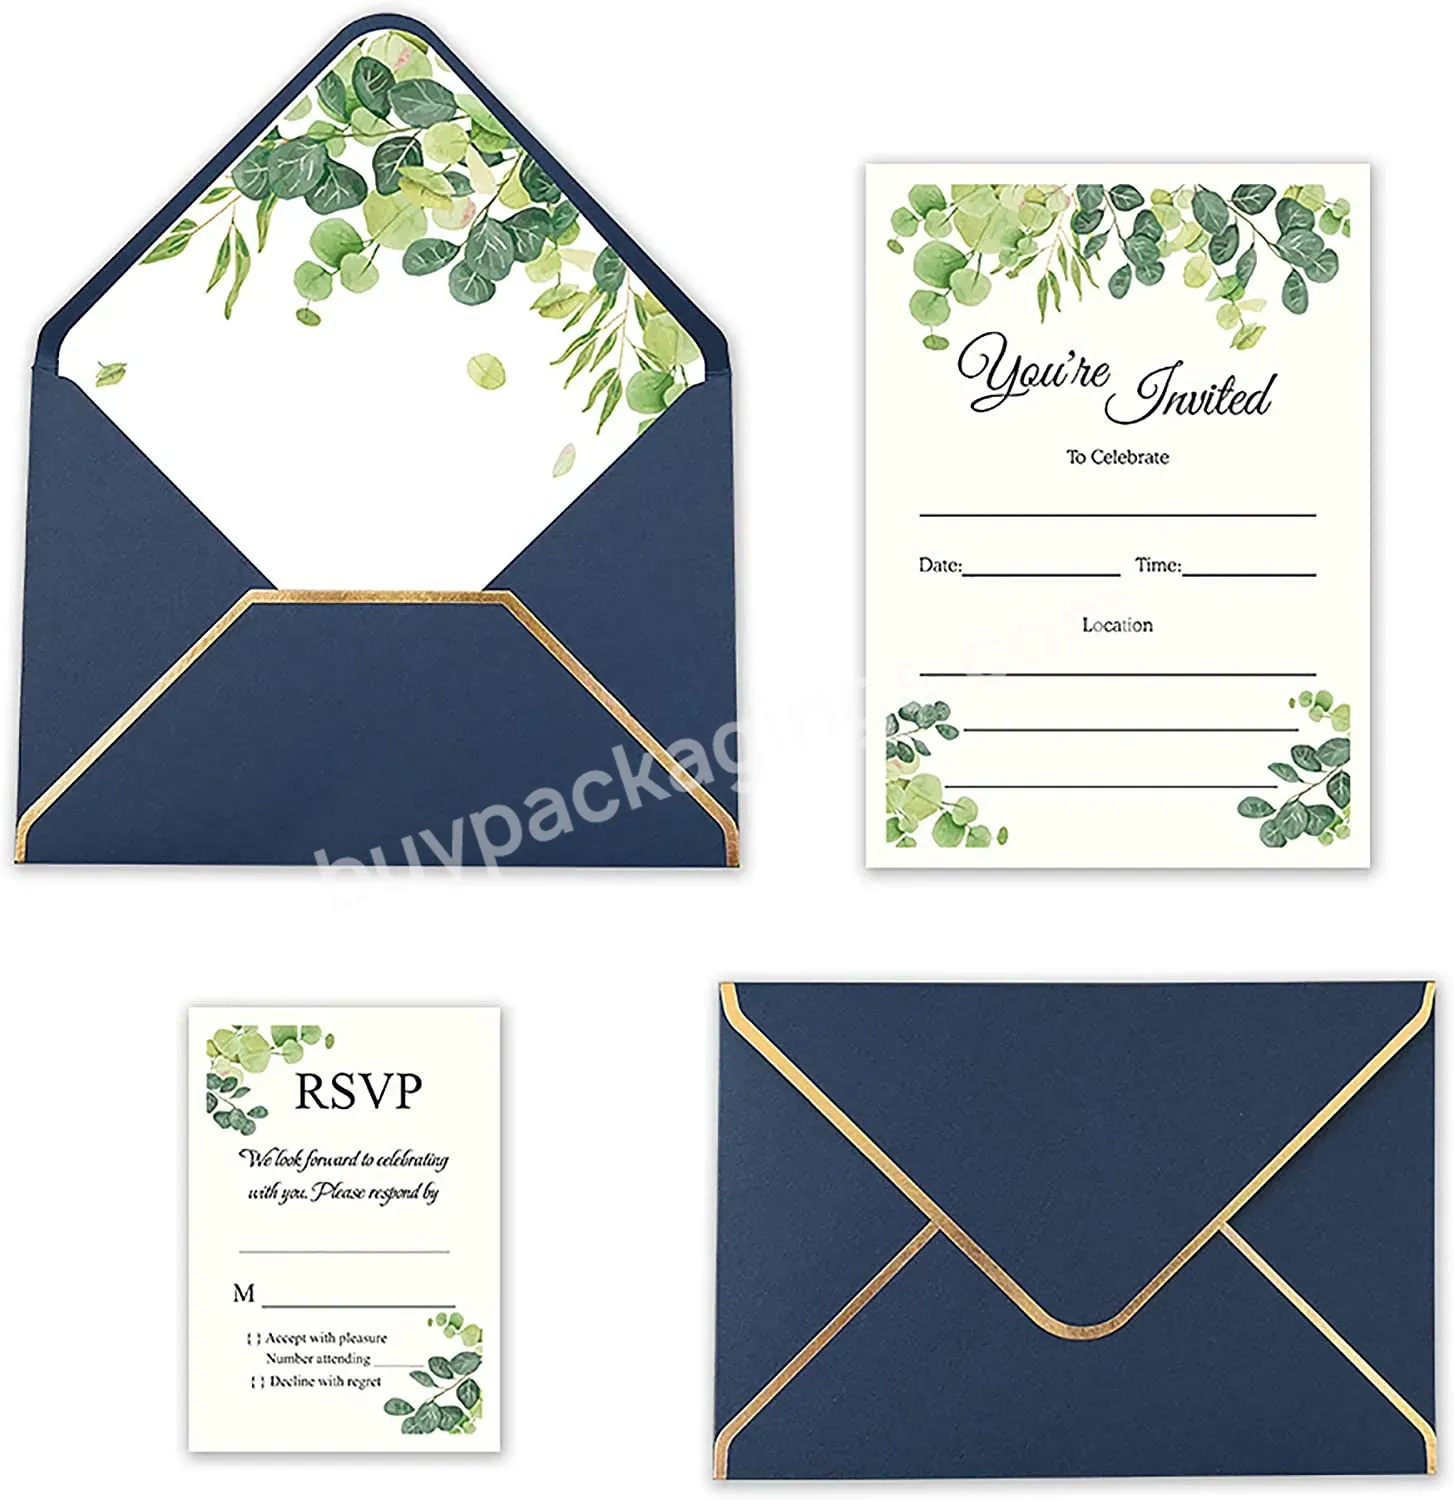 Cards Card Printing Offset Printing Greeting Card Free Design Custom Wedding Invitation Luxury Hot Stamping Datang Custom Size - Buy Thank You Cards,Greeting Cards,Envelope.